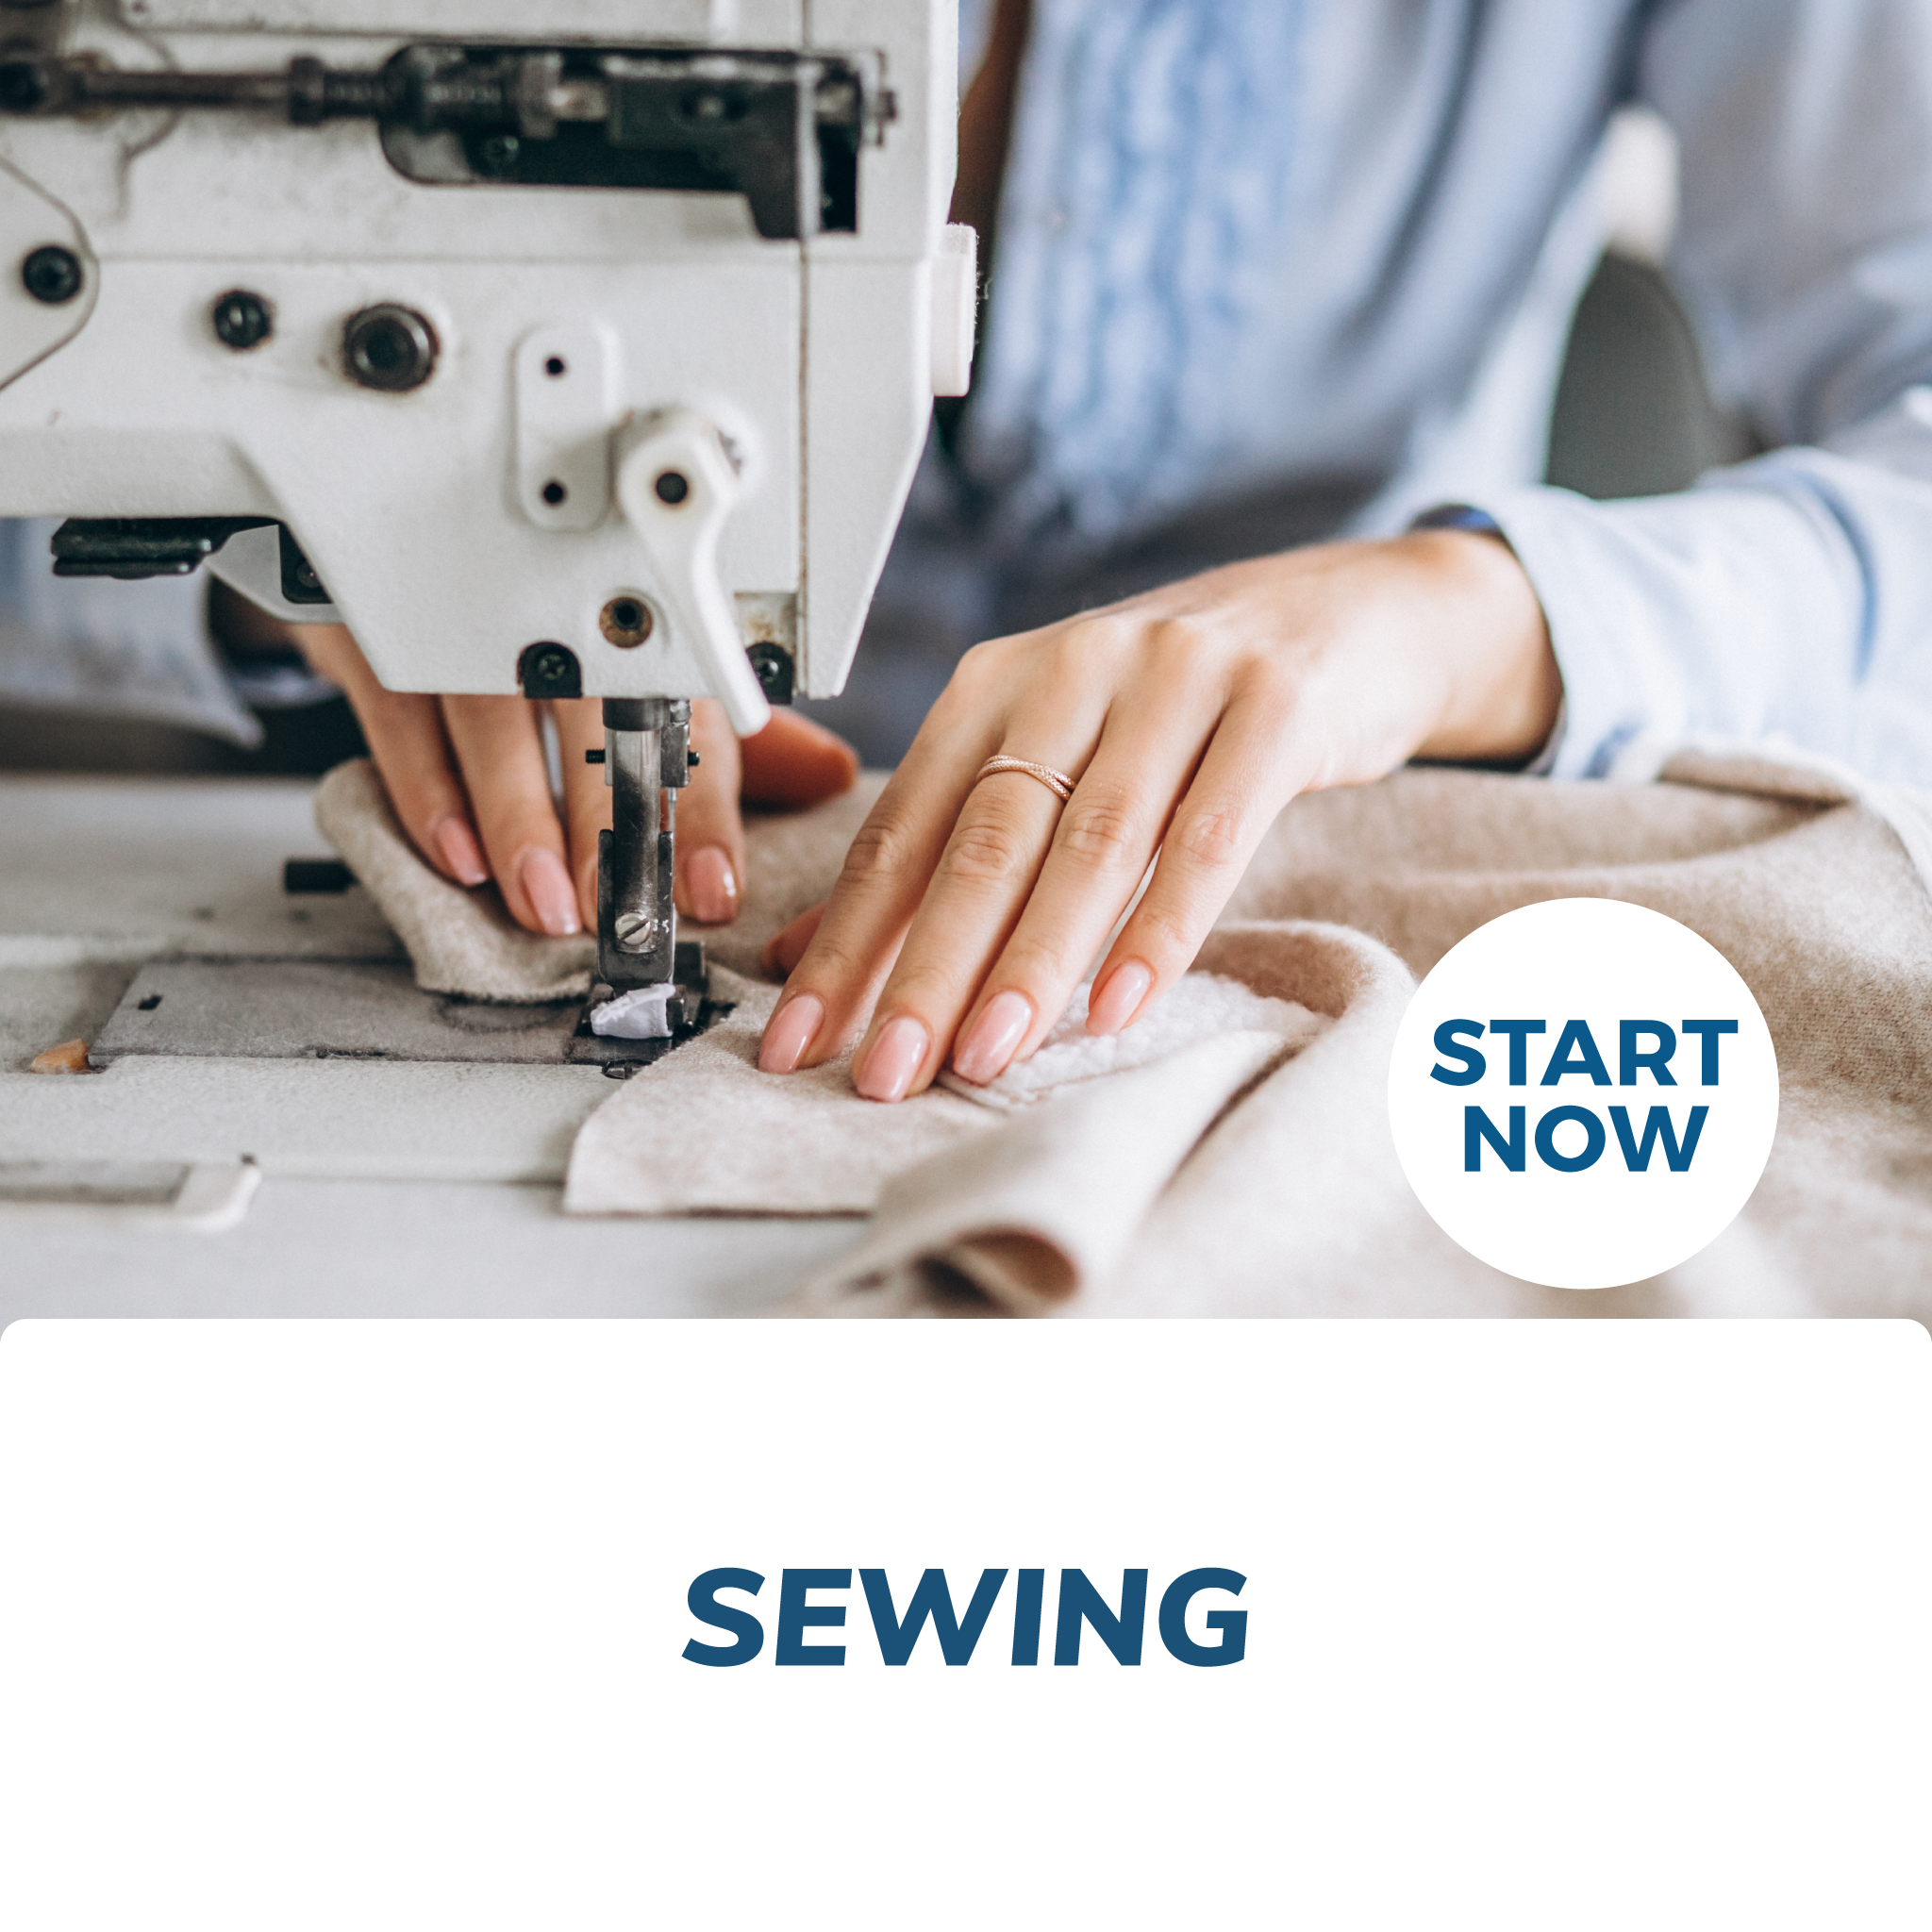 Learn to Sew with Sewing School - The Curriculum Choice